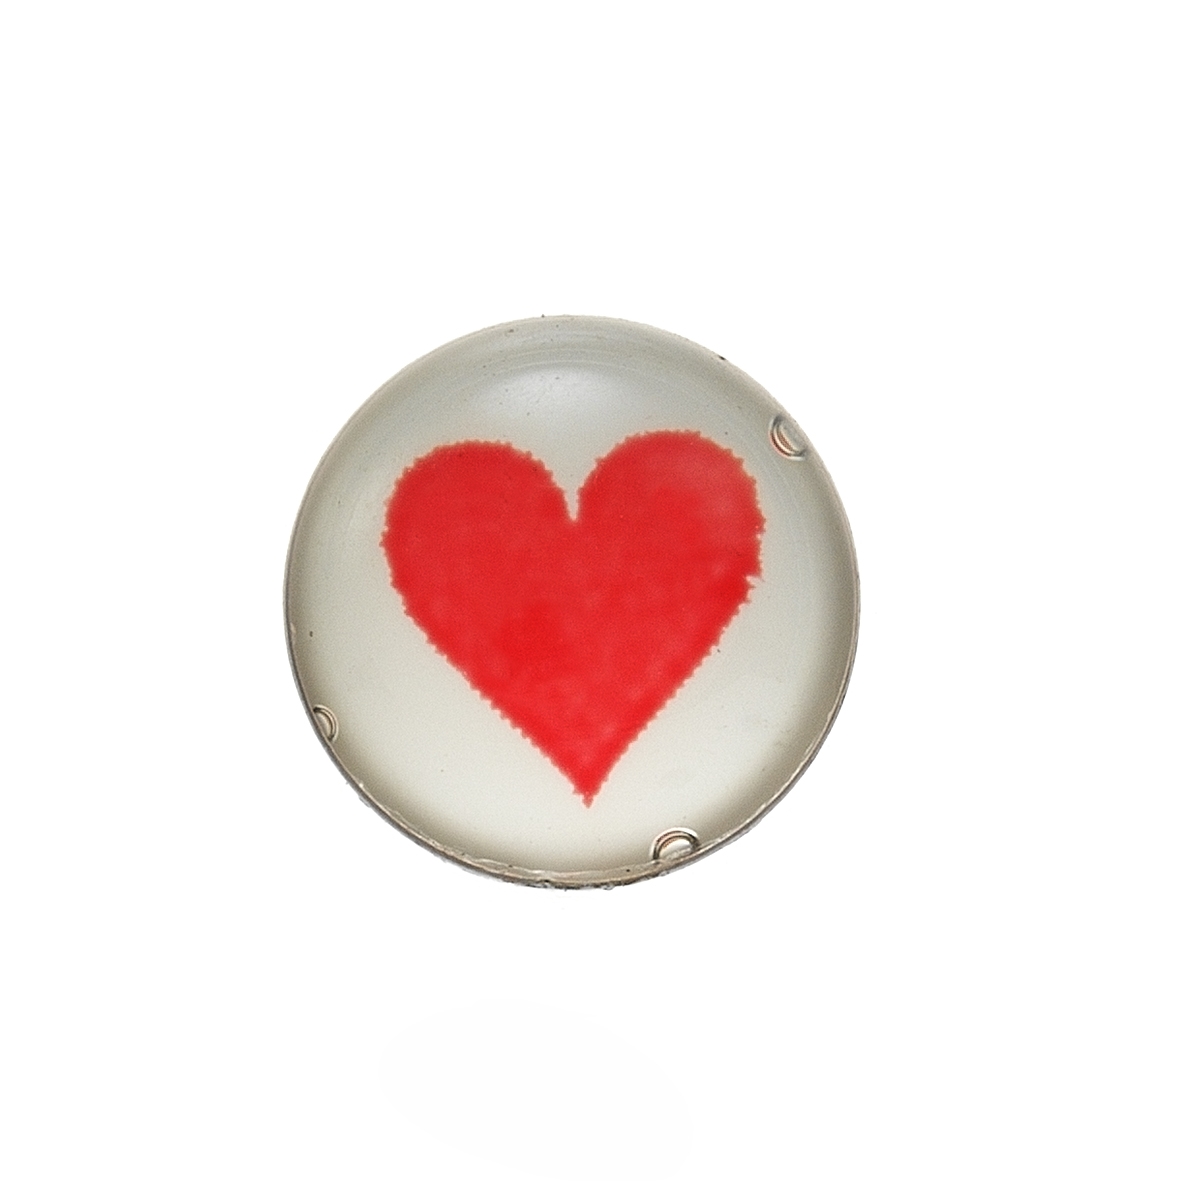 First ear stud System 75 white, novelty design stud, red heart, Studex